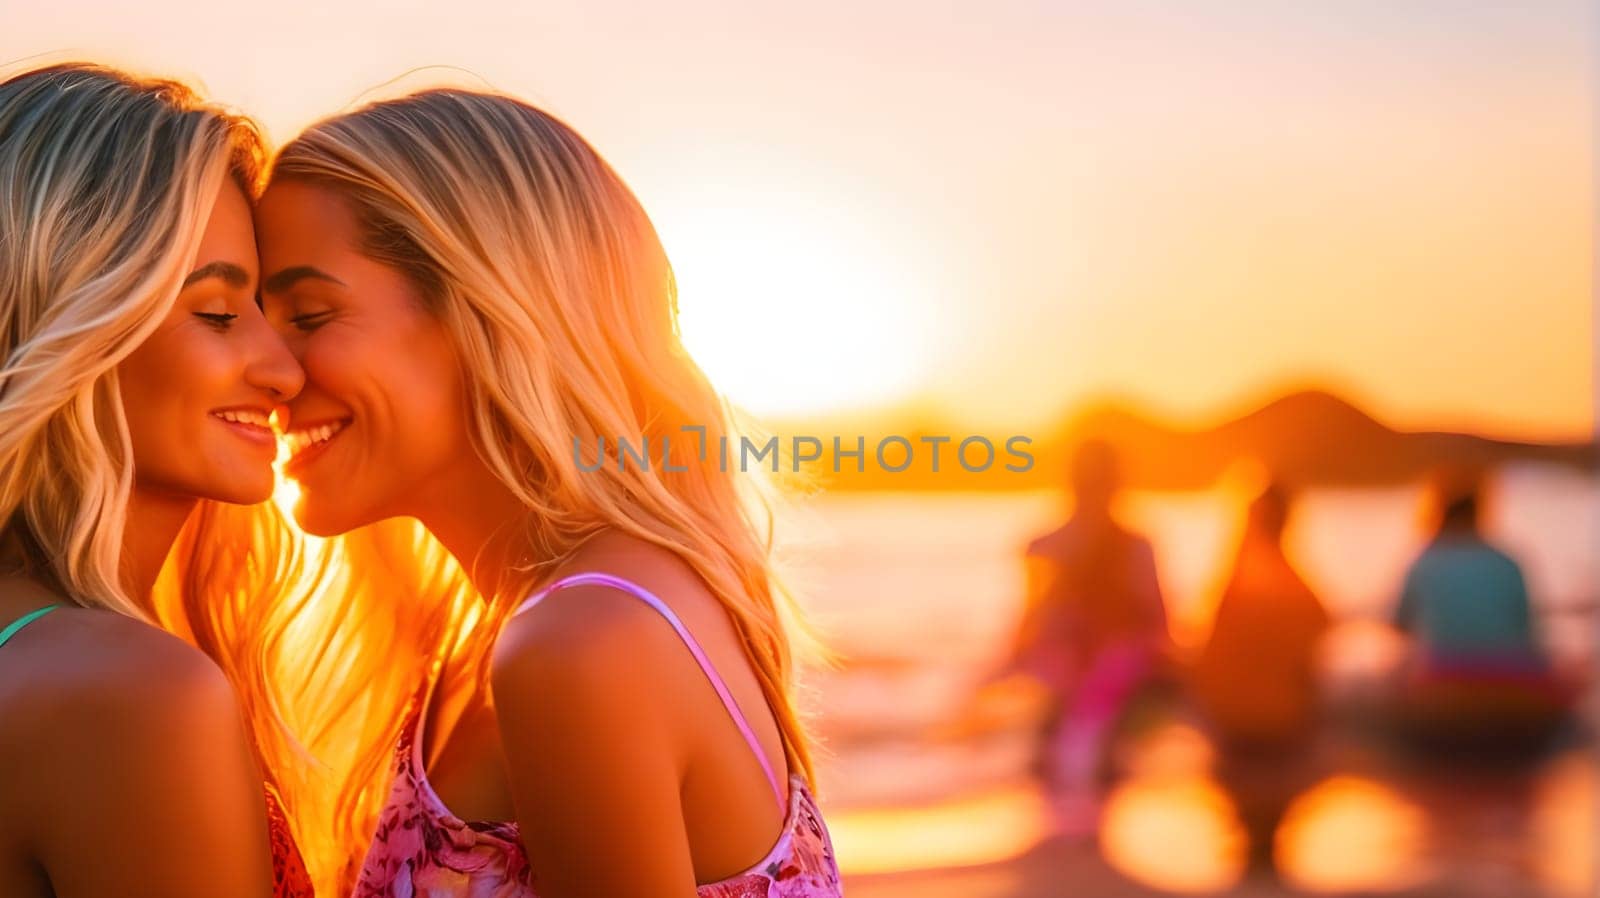 Two blondy lesbians pressed face to face on a tropical beach at sunset. by andre_dechapelle